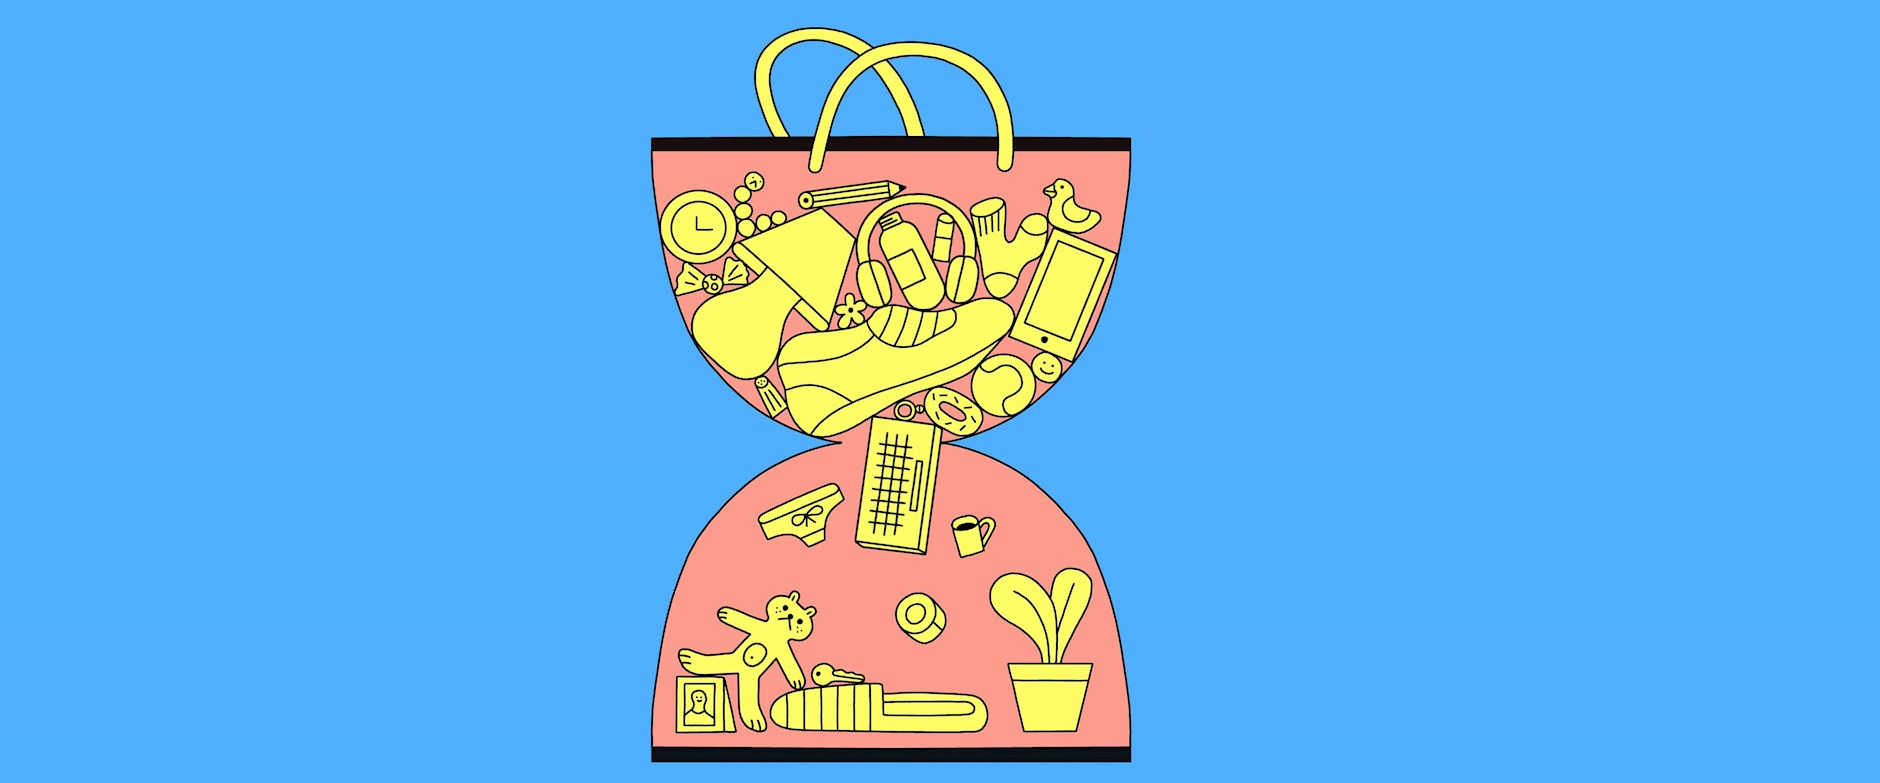 Shopping bag in the shape of an hourglass